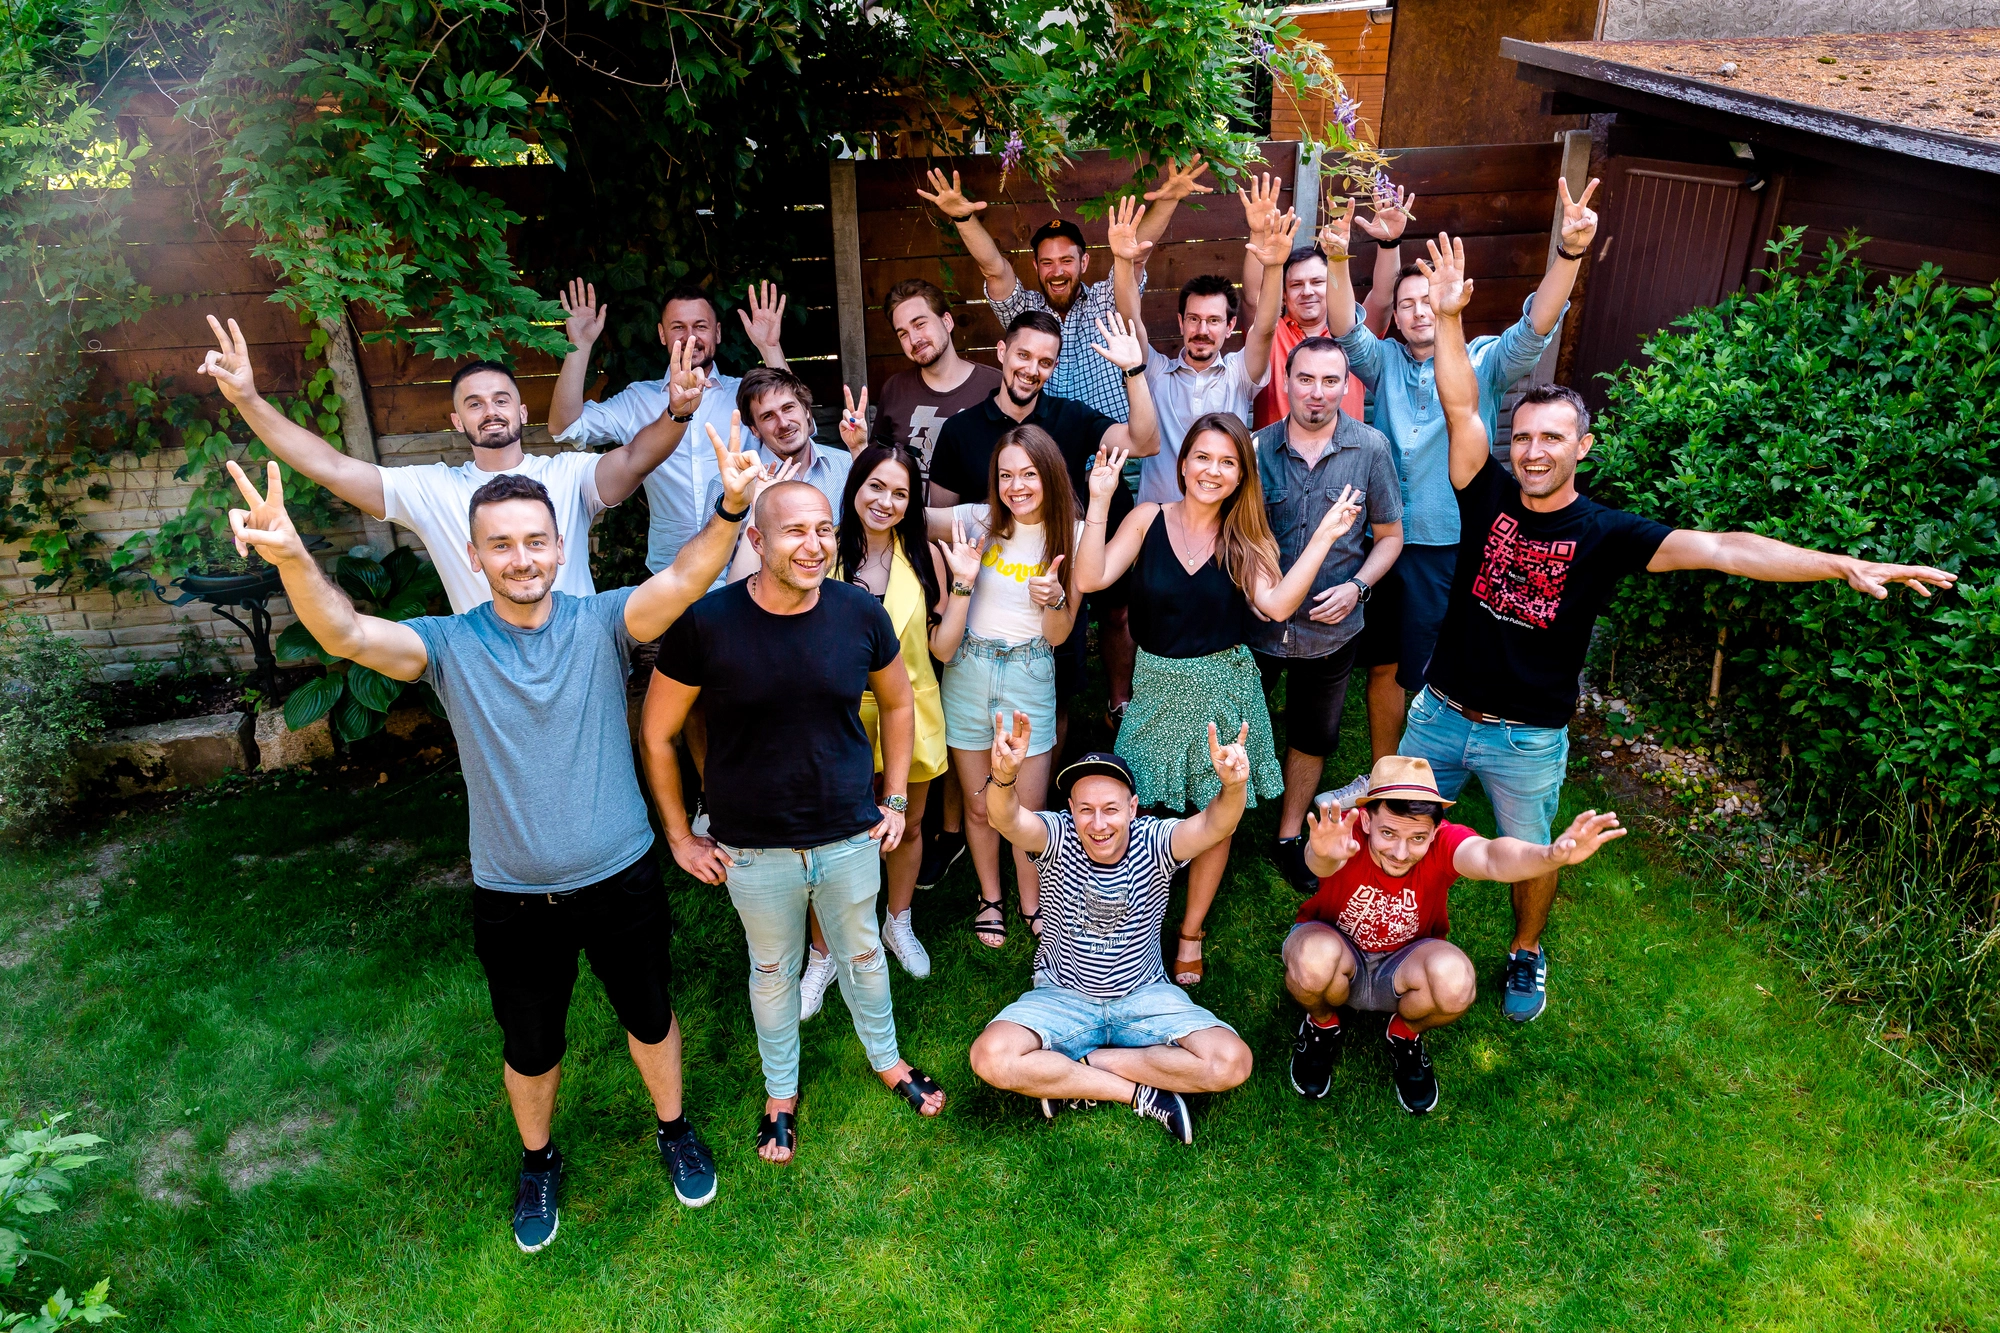 The FatChilli team gathered in a backyard.